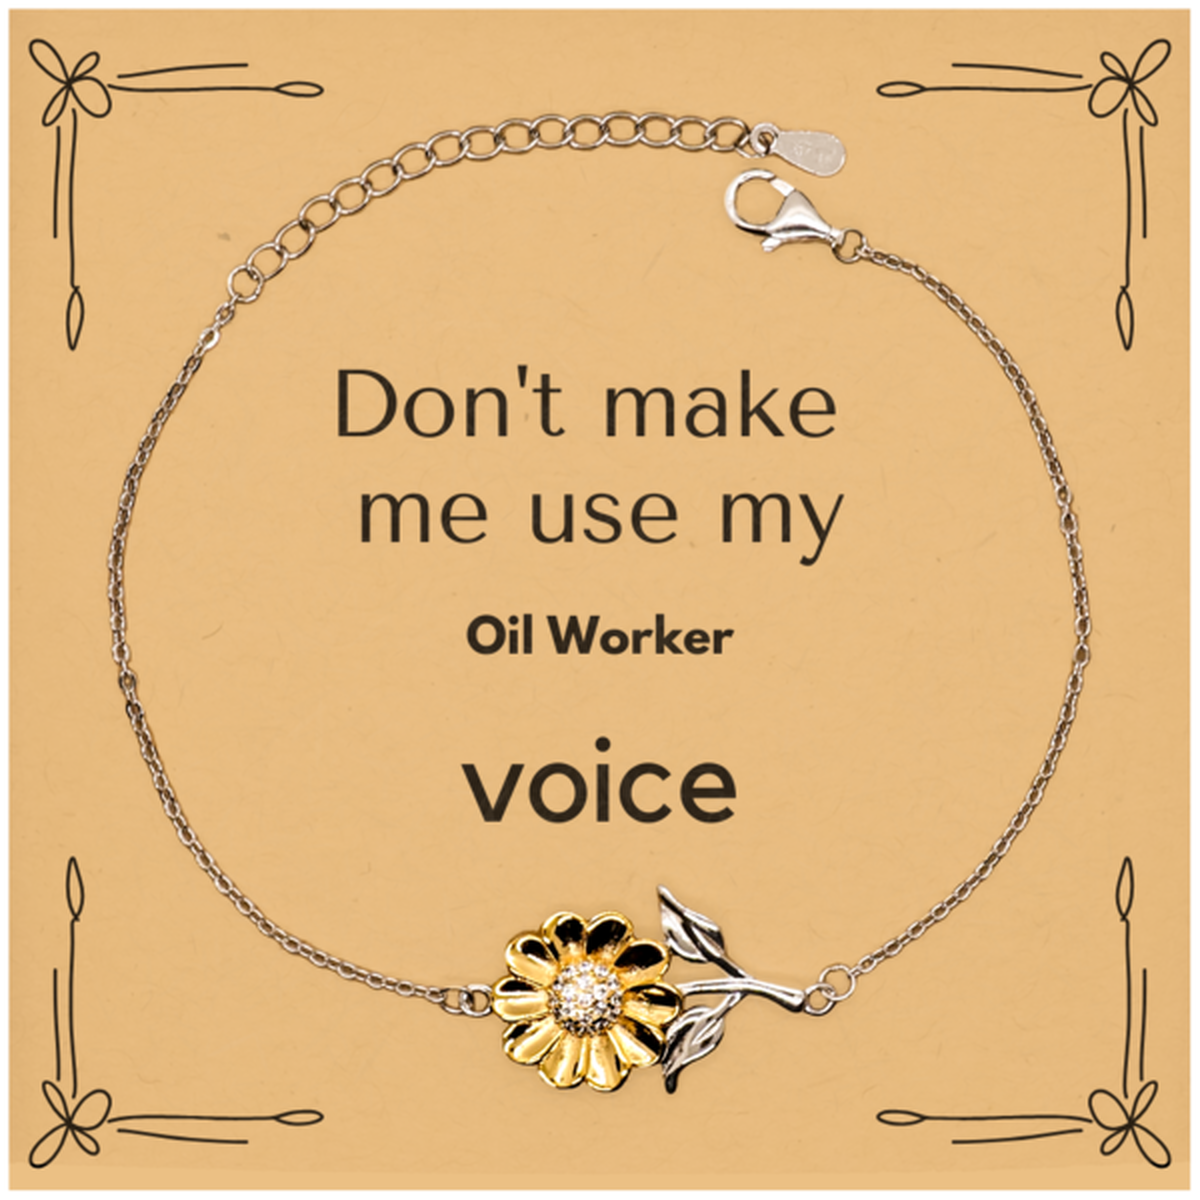 Don't make me use my Oil Worker voice, Sarcasm Oil Worker Card Gifts, Christmas Oil Worker Sunflower Bracelet Birthday Unique Gifts For Oil Worker Coworkers, Men, Women, Colleague, Friends